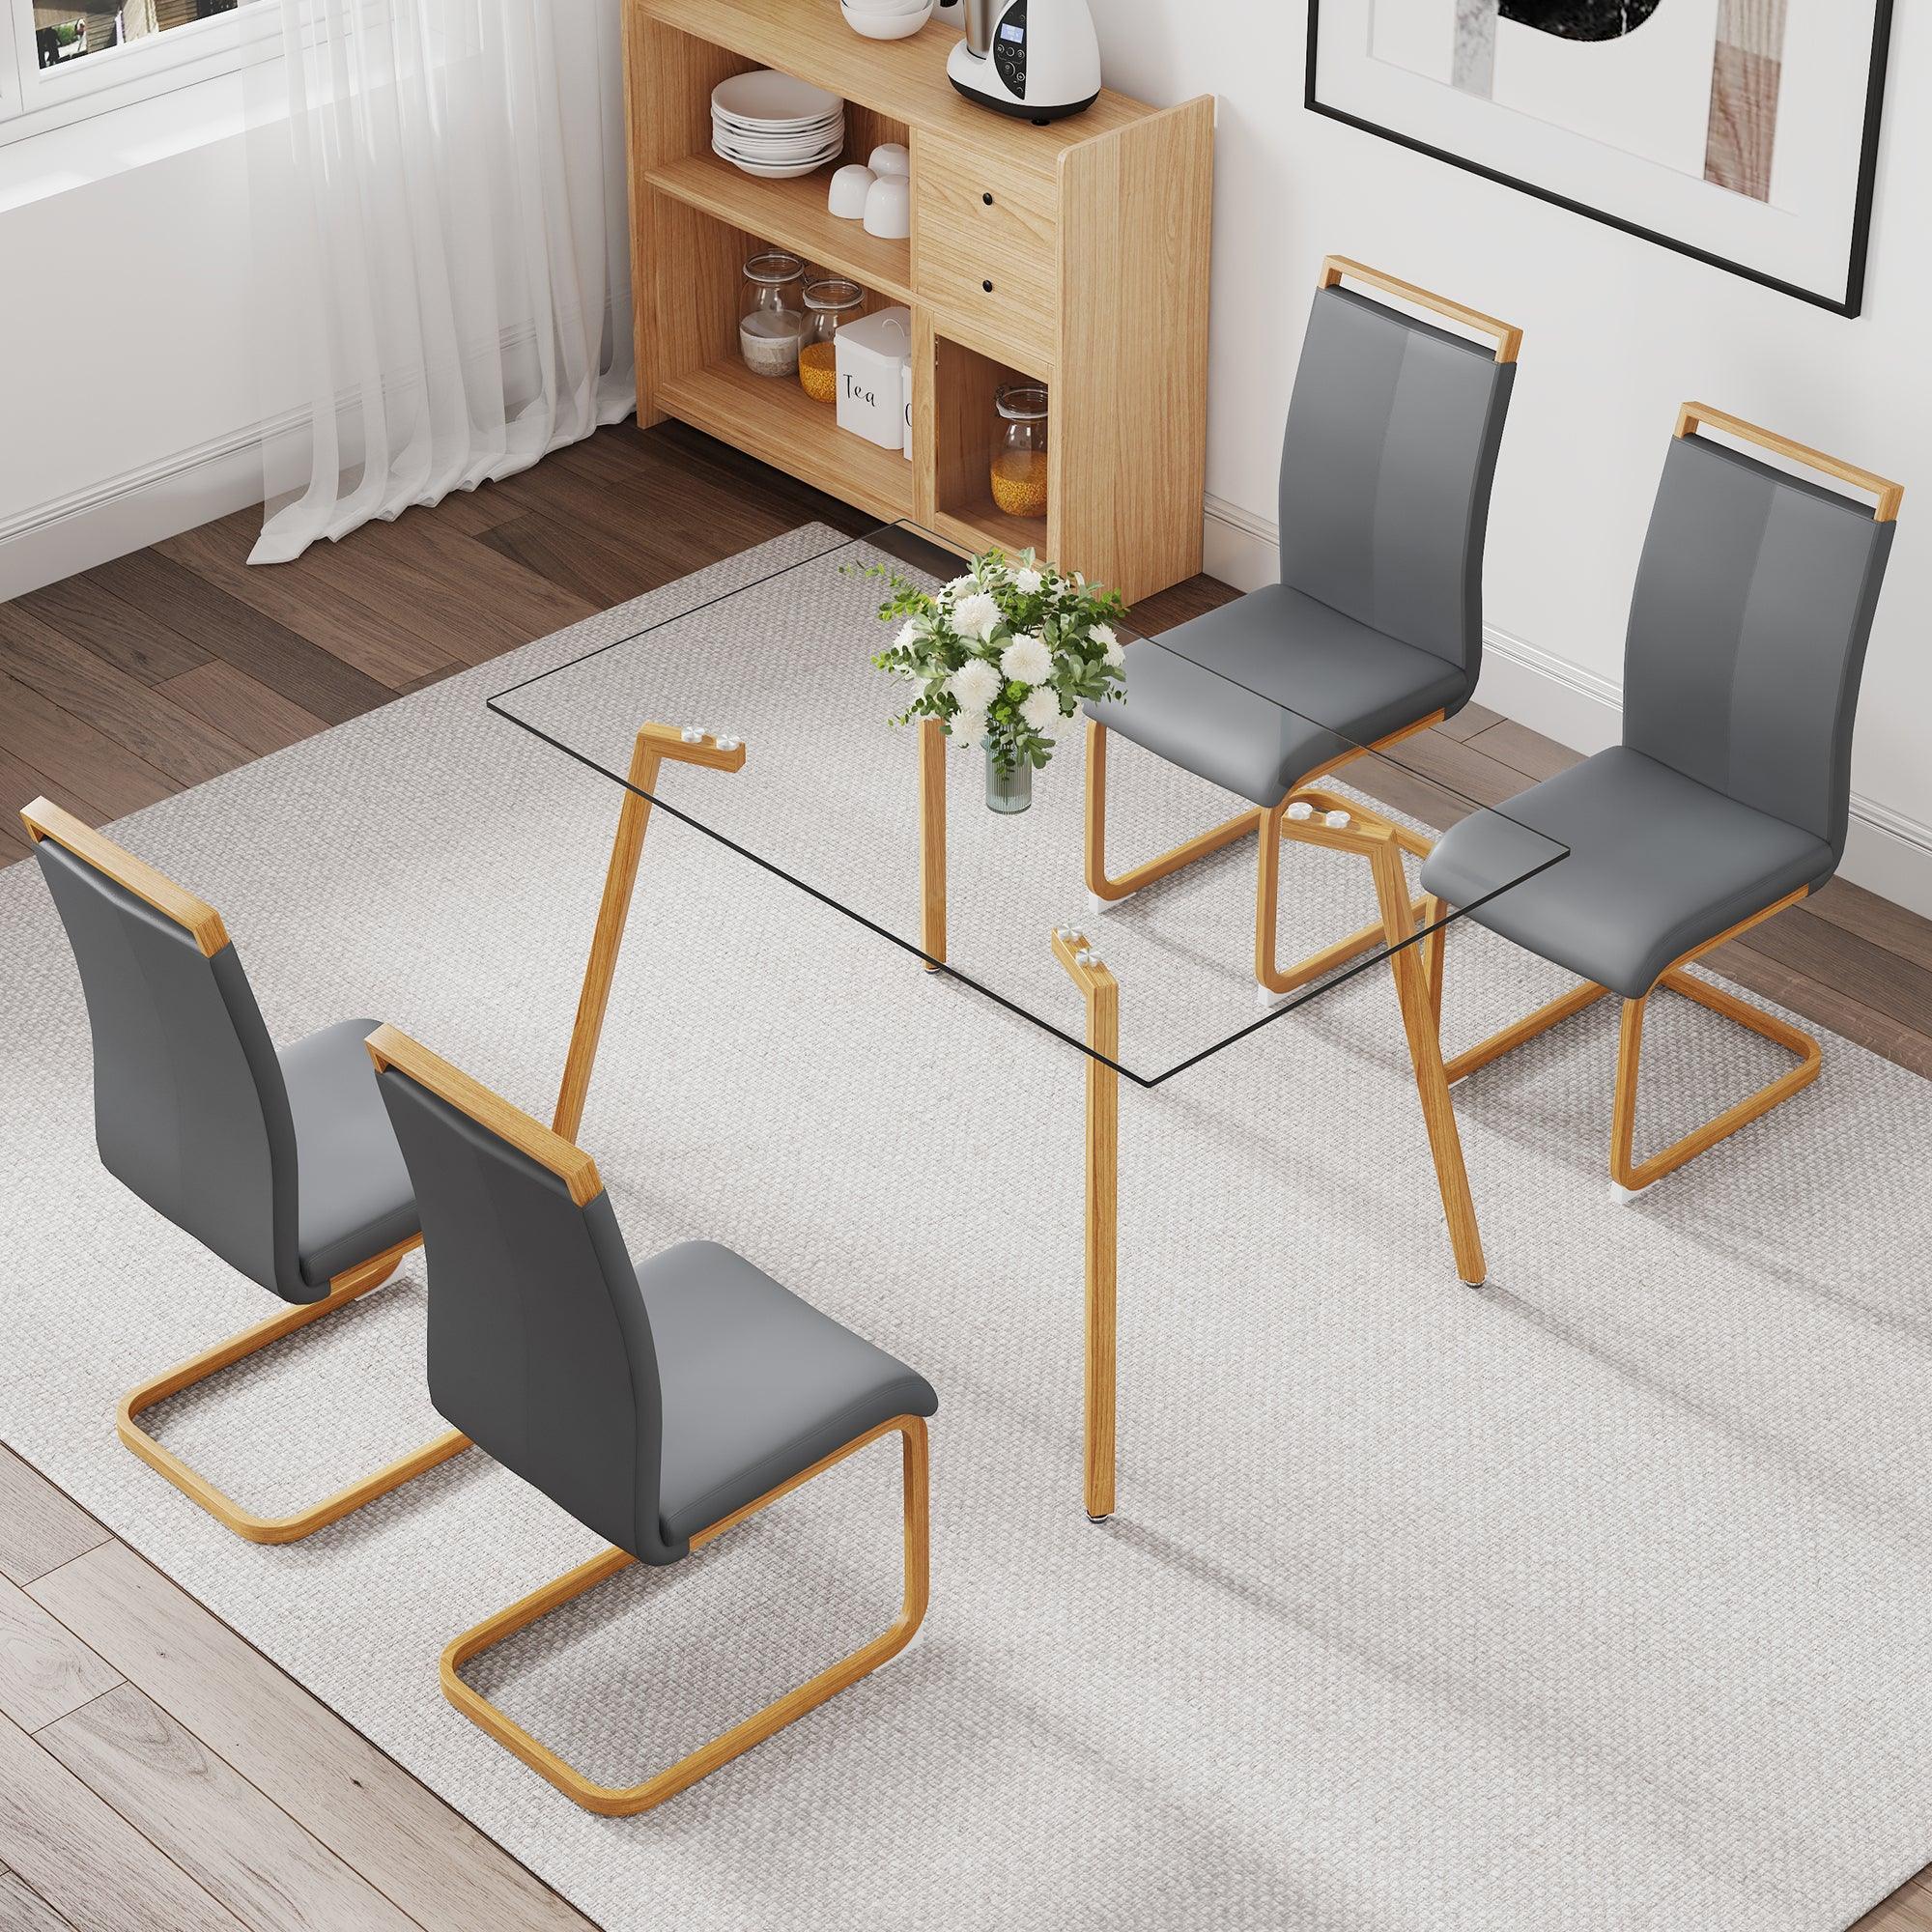 🆓🚛 Table & Chair Set, 1 Table & 4 Gray Chairs Glass Dining Table With 0.31" Tempered Glass Tabletop & Wood Color Metal Legs, Pu Leather High Back Upholstered Chair With Wood Color Metal Leg